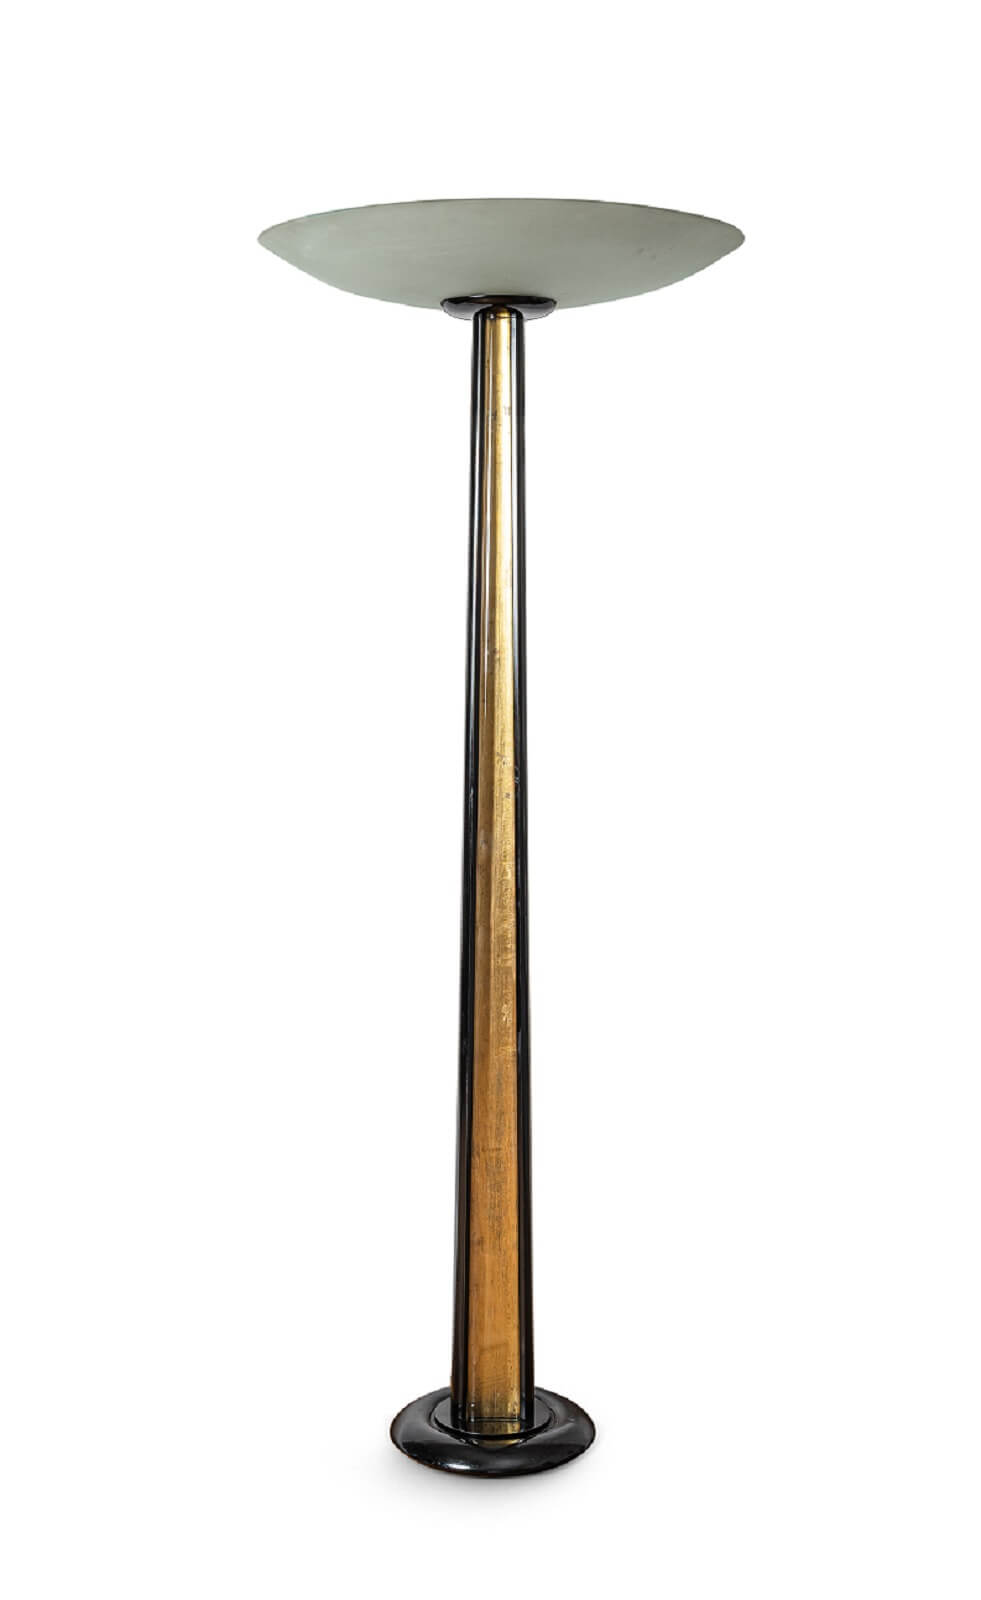 Floor lamp by Pietro Chiesa for sale